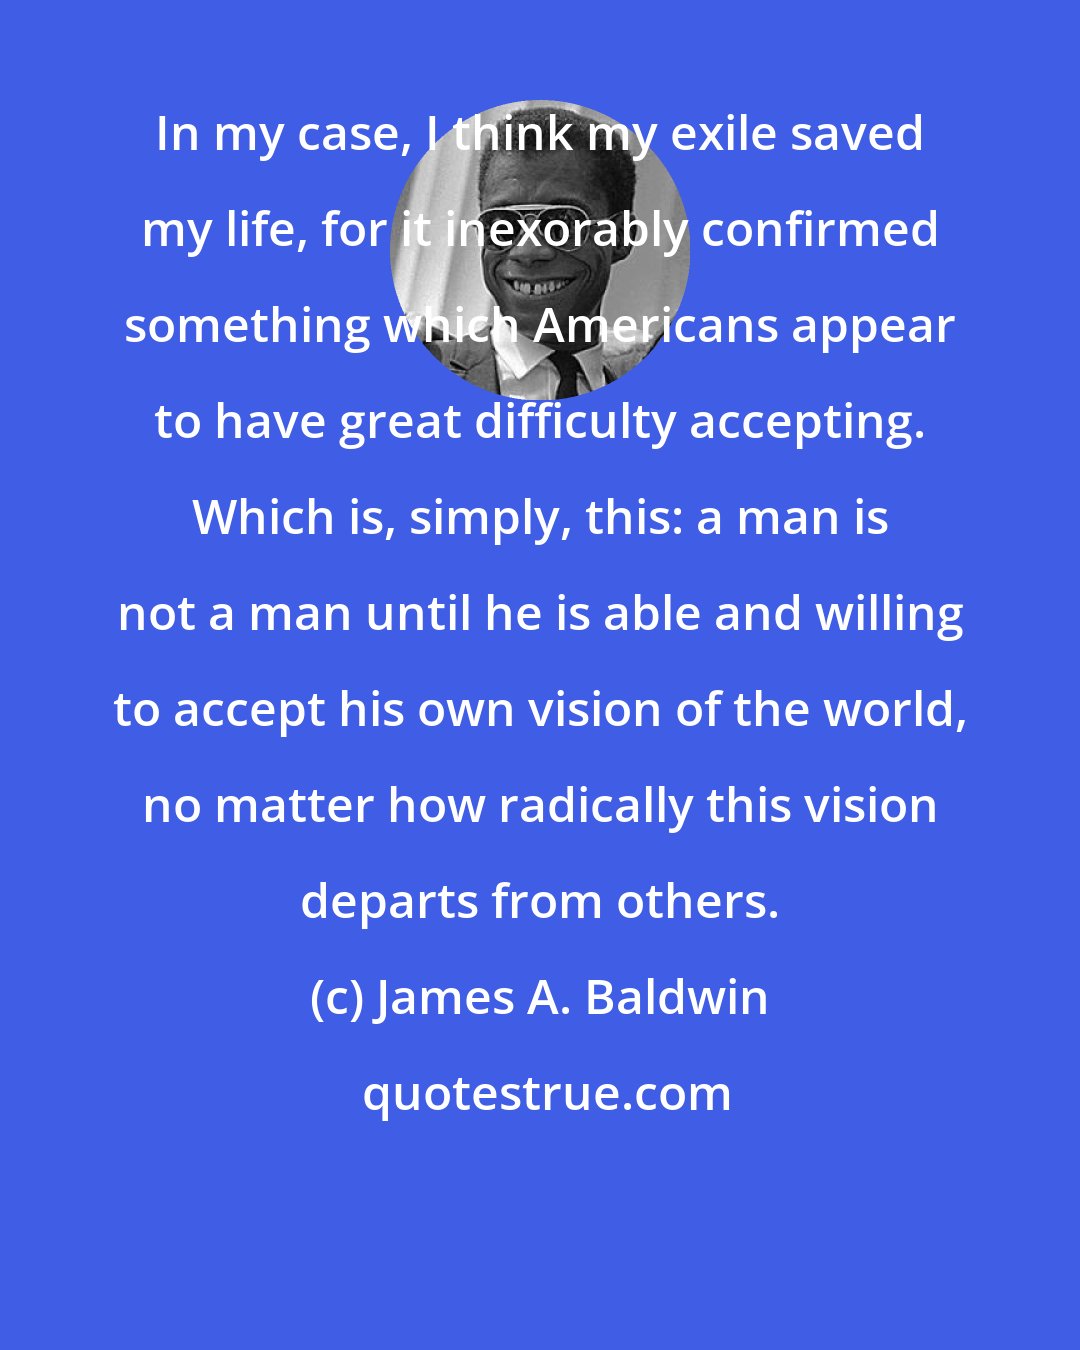 James A. Baldwin: In my case, I think my exile saved my life, for it inexorably confirmed something which Americans appear to have great difficulty accepting. Which is, simply, this: a man is not a man until he is able and willing to accept his own vision of the world, no matter how radically this vision departs from others.